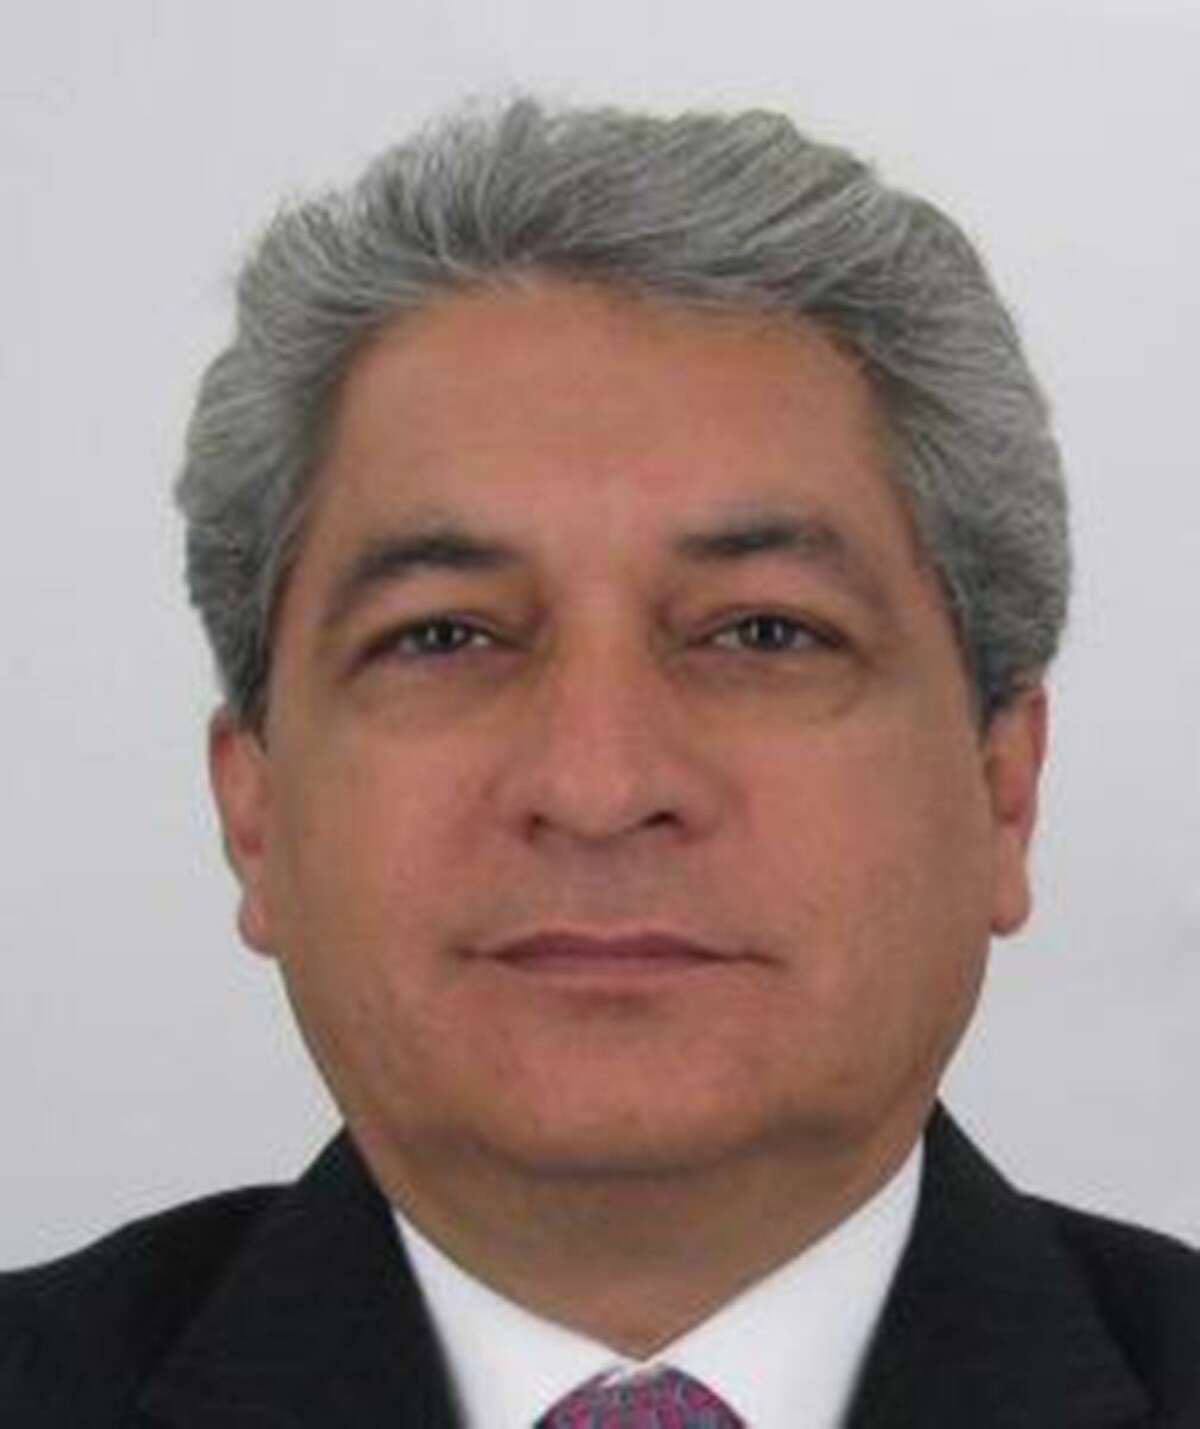 Tomas Yarrington Ruvalcaba, the former governor of the State of Tamaulipas, charged with conspiracy to launder money, conspiracy to defraud and conspiracy to make false statements to federally insured U.S. banks.